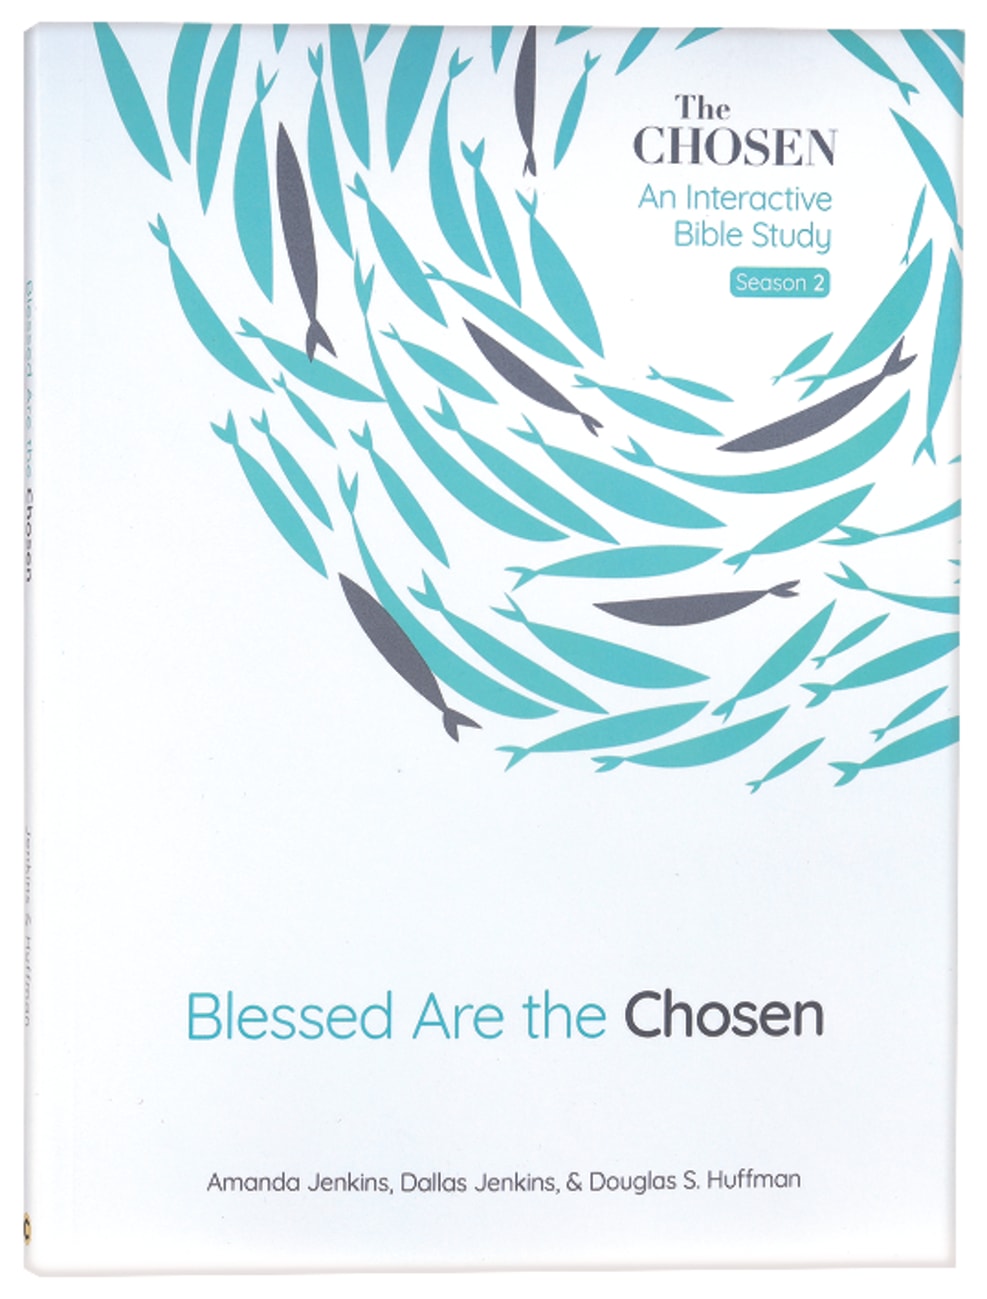 CHSN:BLESSED ARE THE CHOSEN (SEASON 2):INTERACTIVE BIBLE STUDY